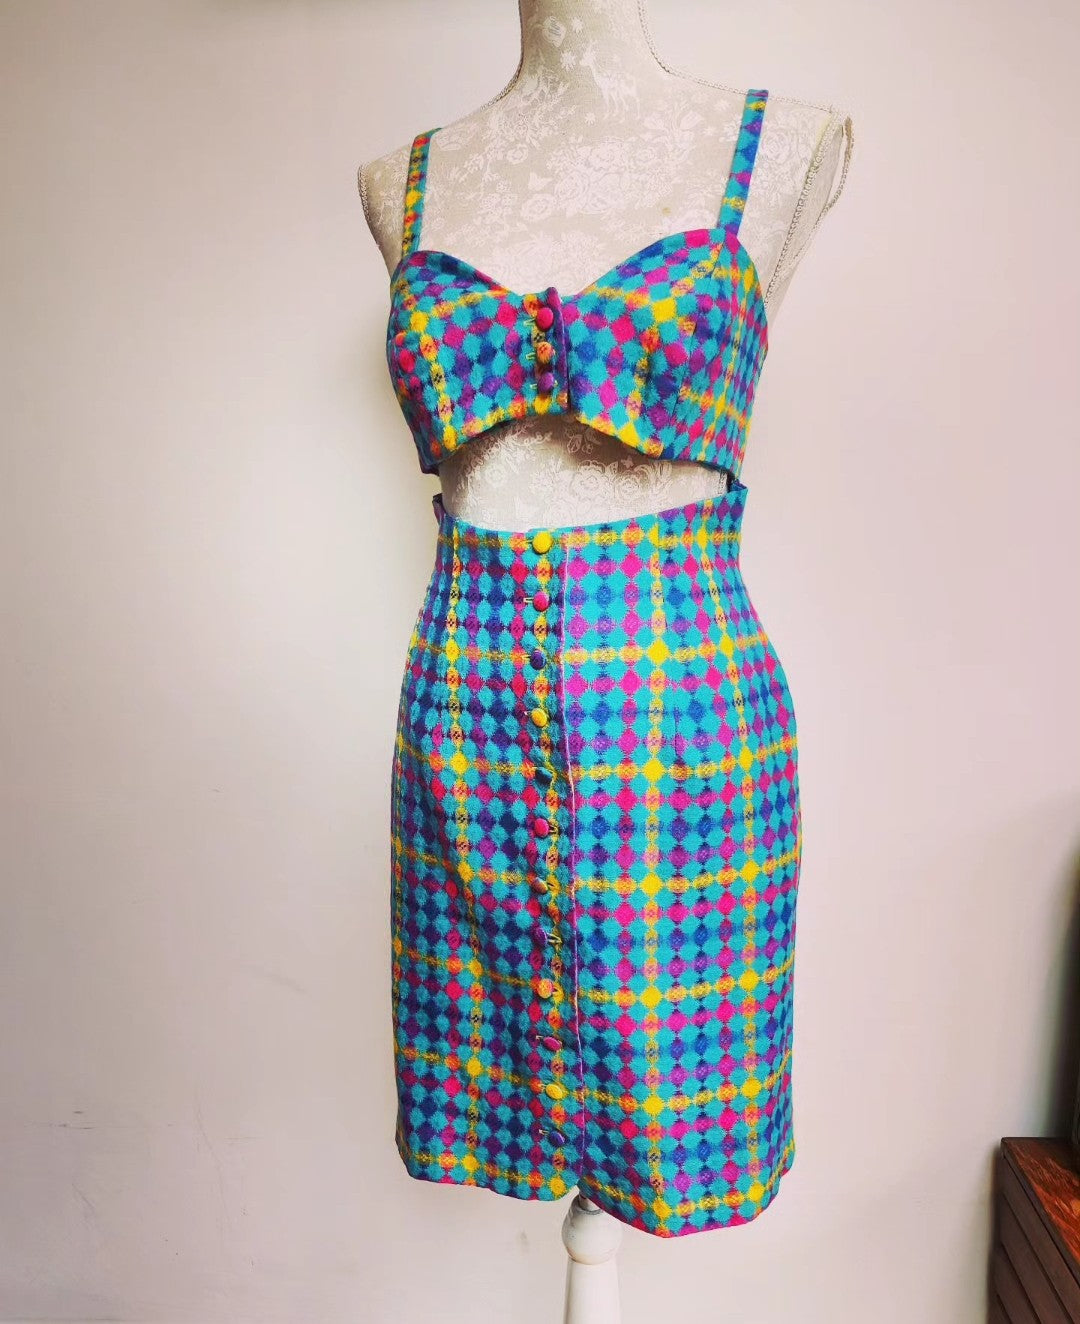 Incredible homemade vintage dress with cut away midriff